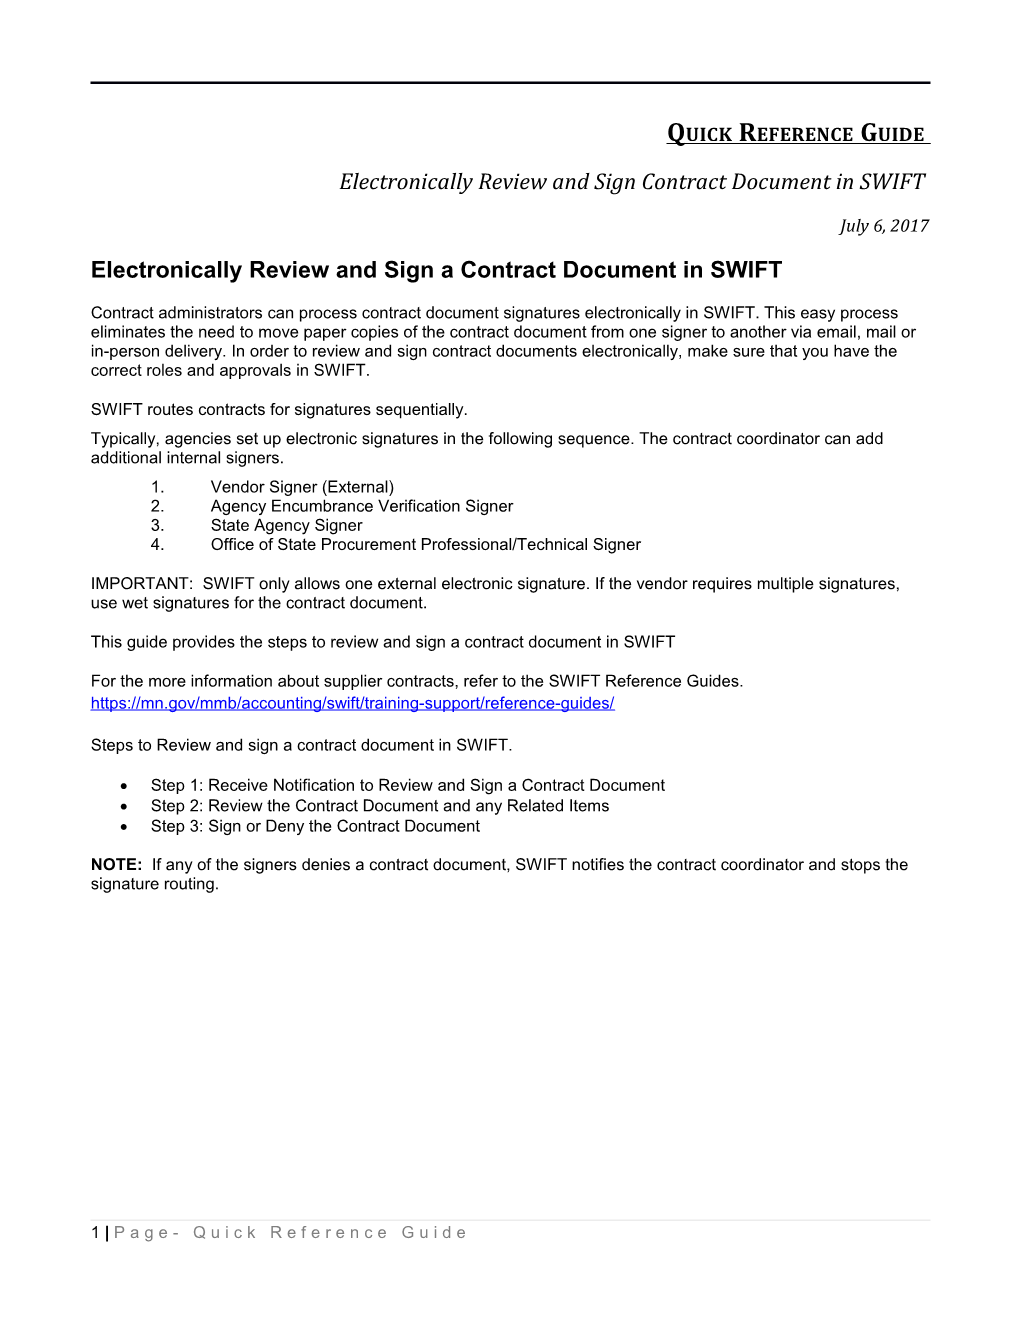 Electronically Review and Sign Contract Document in SWIFT